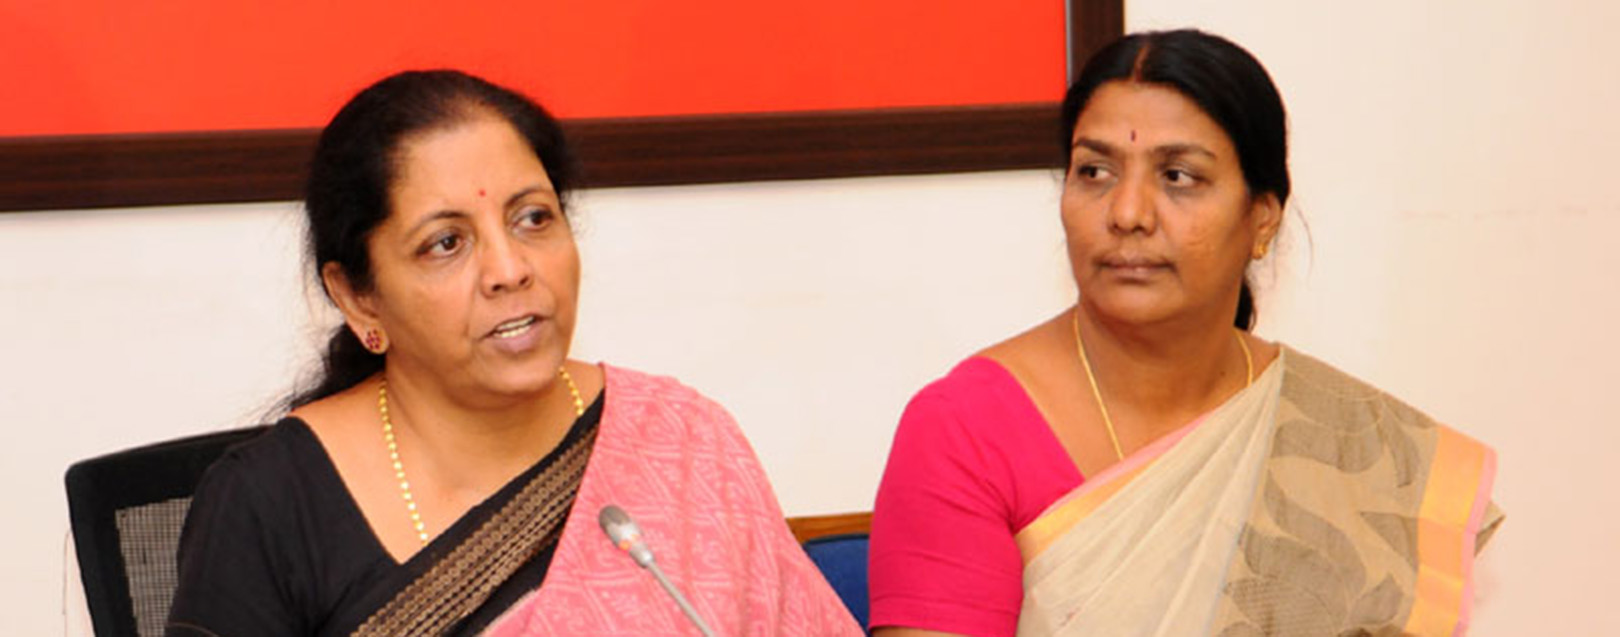  India keen to increase manufacturing sector's contribution to GDP to 25%, Sitharaman